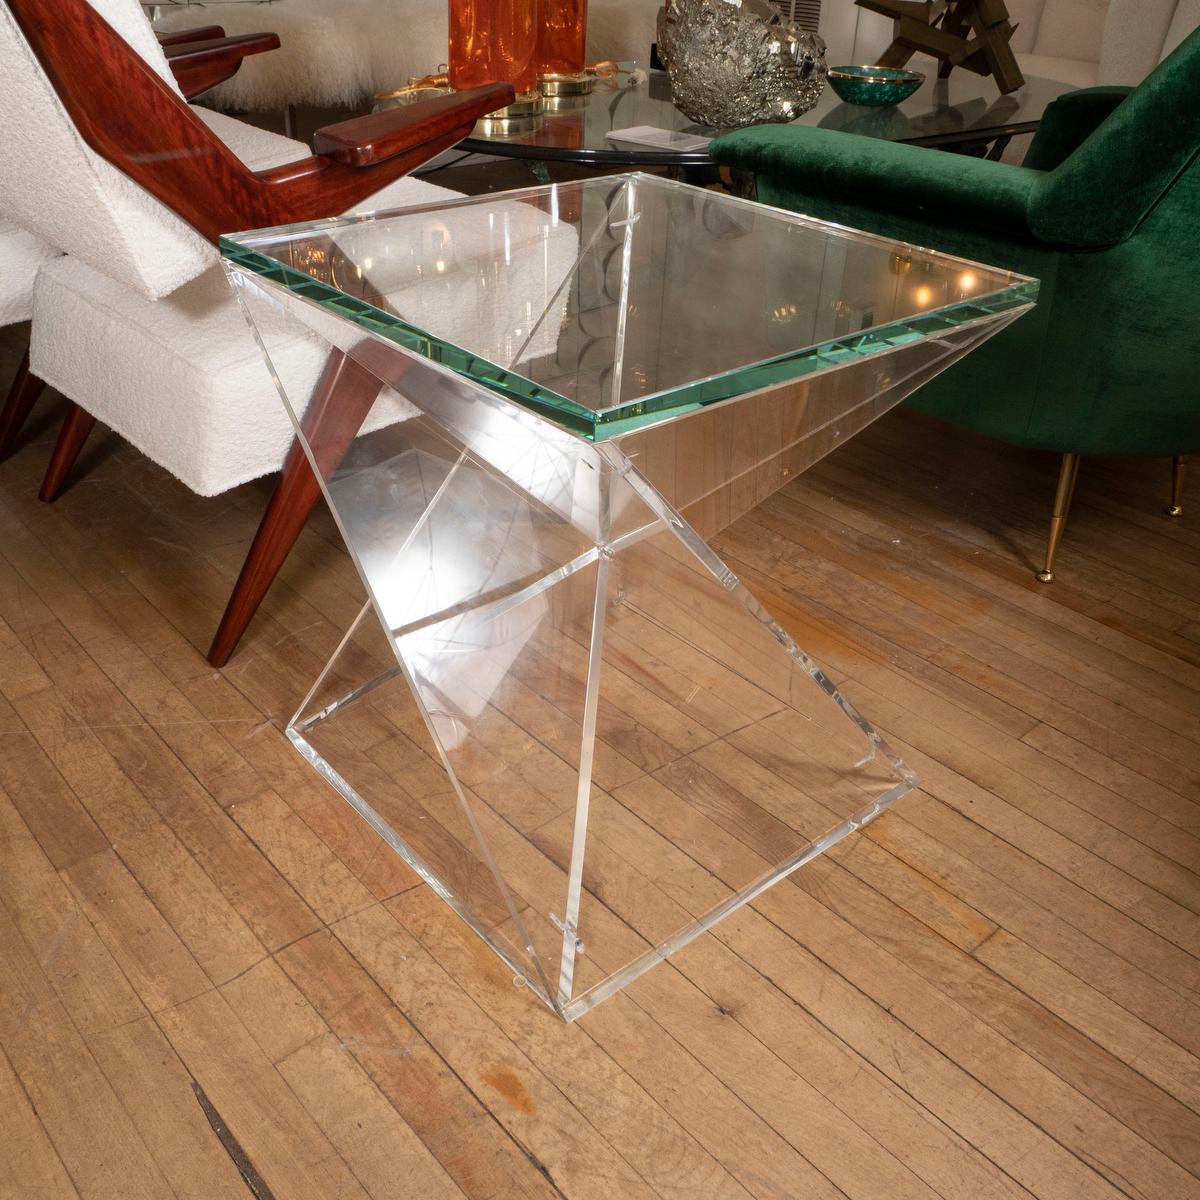 Unusual intersecting Lucite and glass side table.